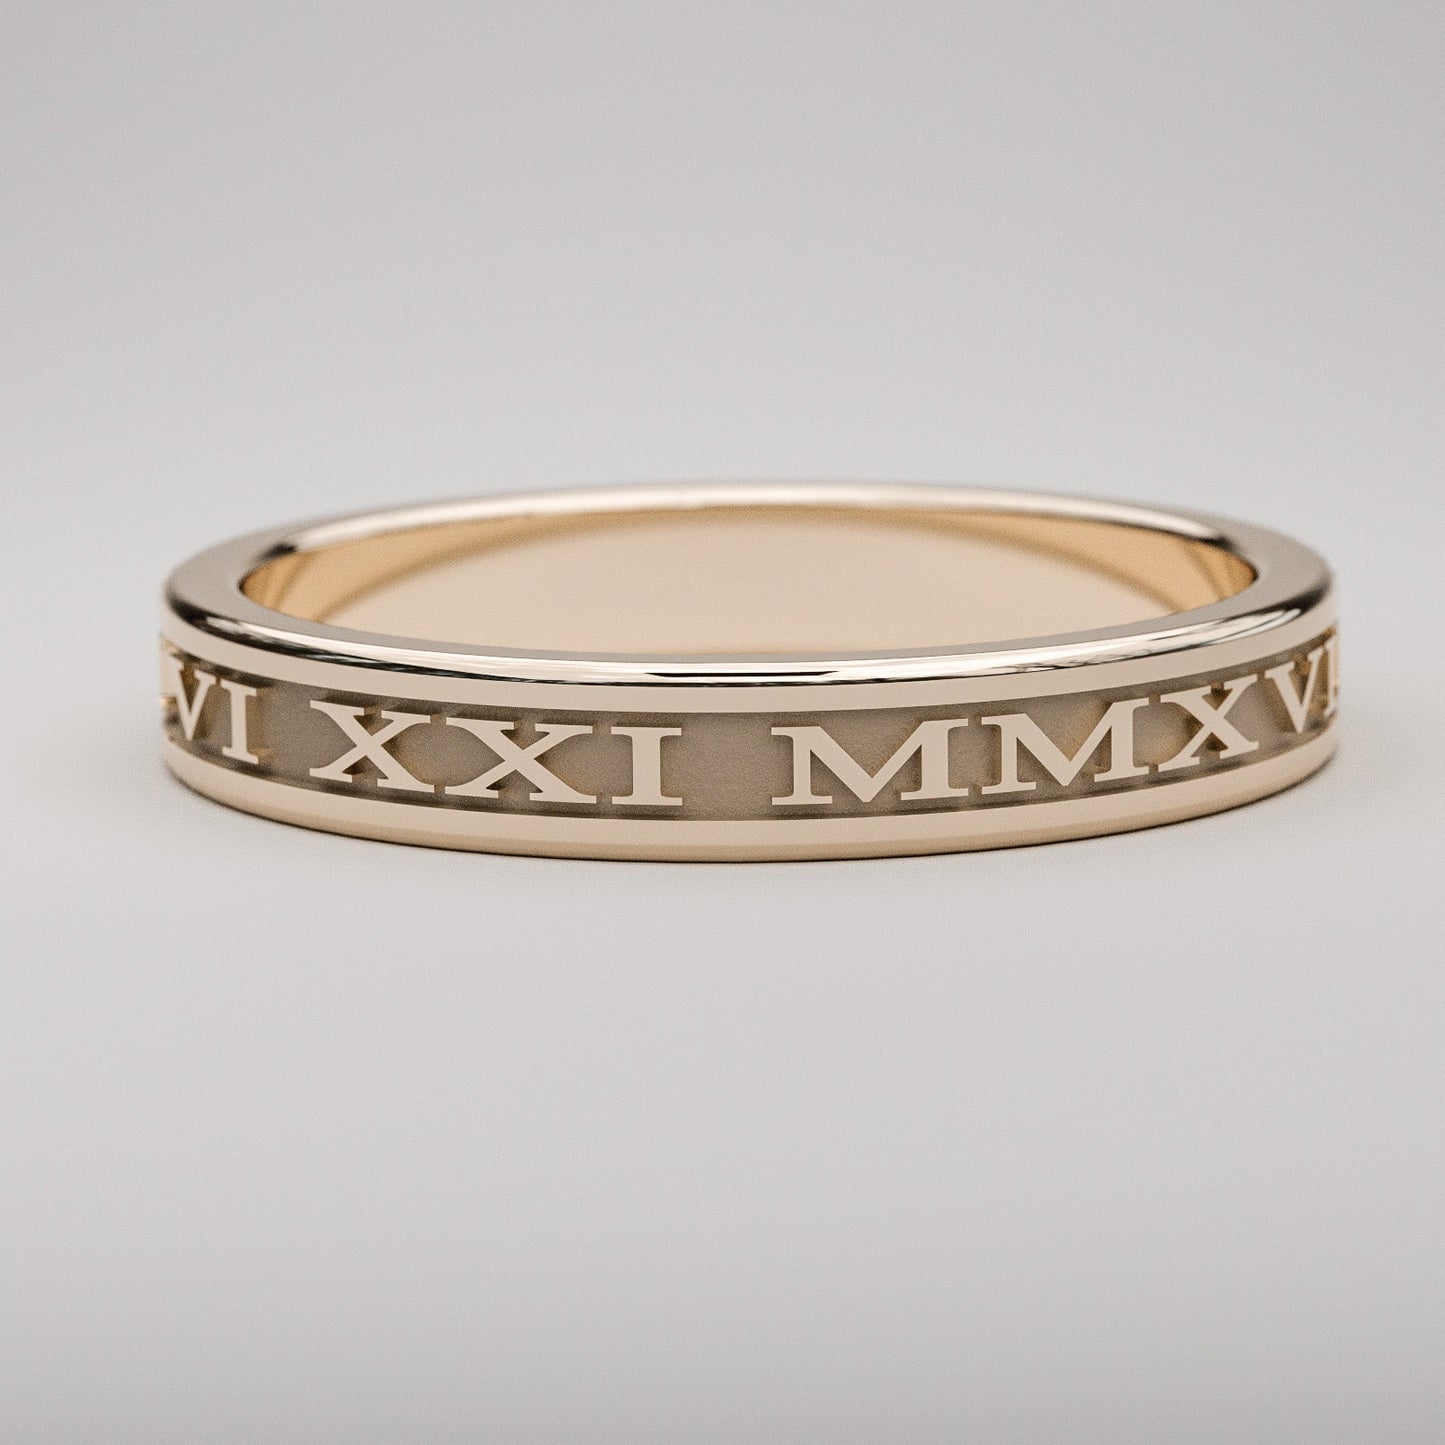 Custom Roman Numeral wedding band in 14k rose gold, 3mm wide